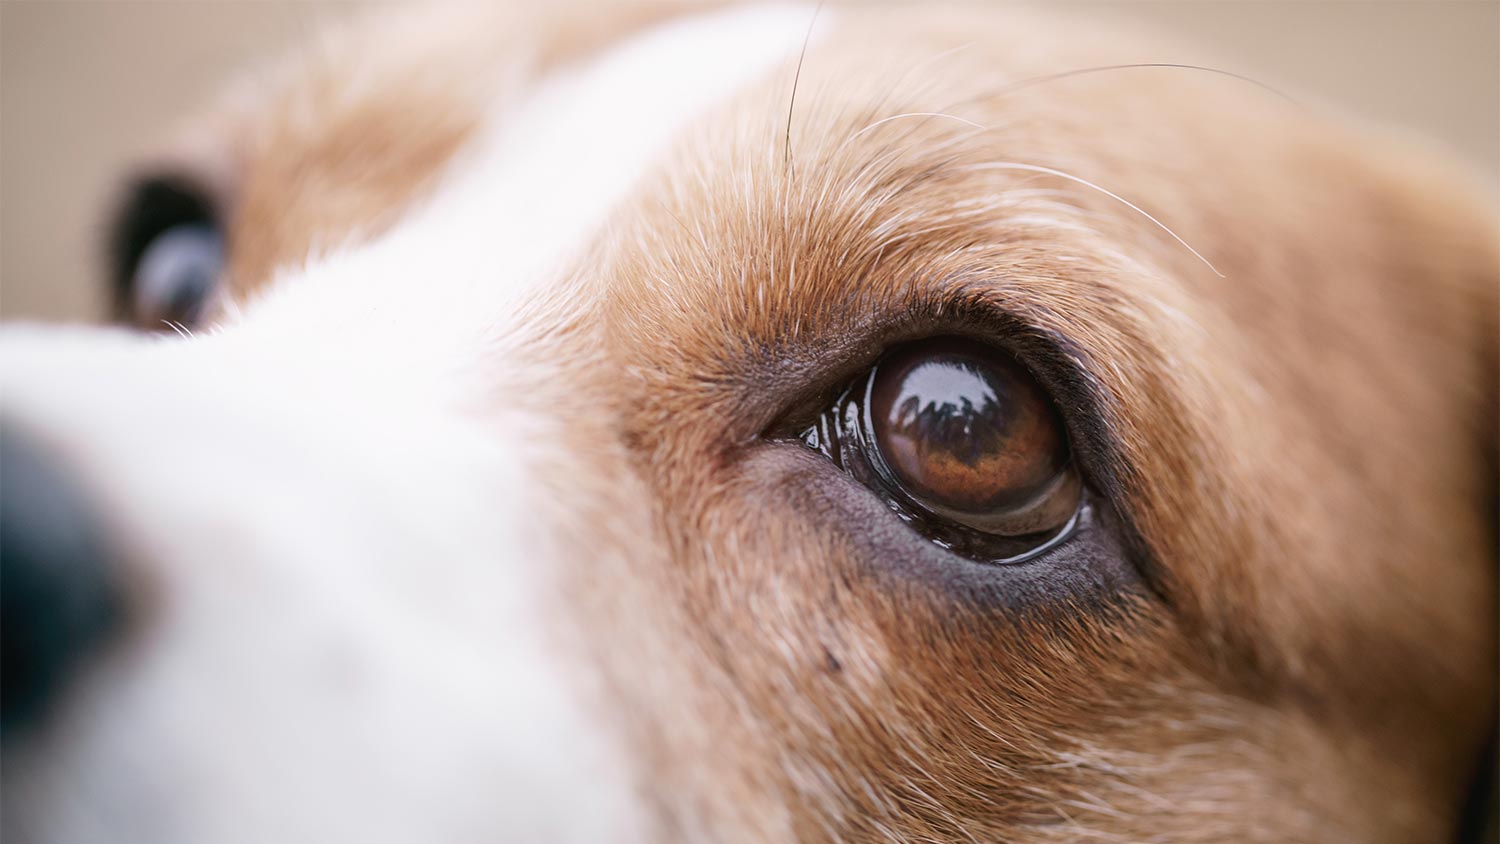 6 Most Common Eye Problems In Dogs,Robo Dwarf Hamster